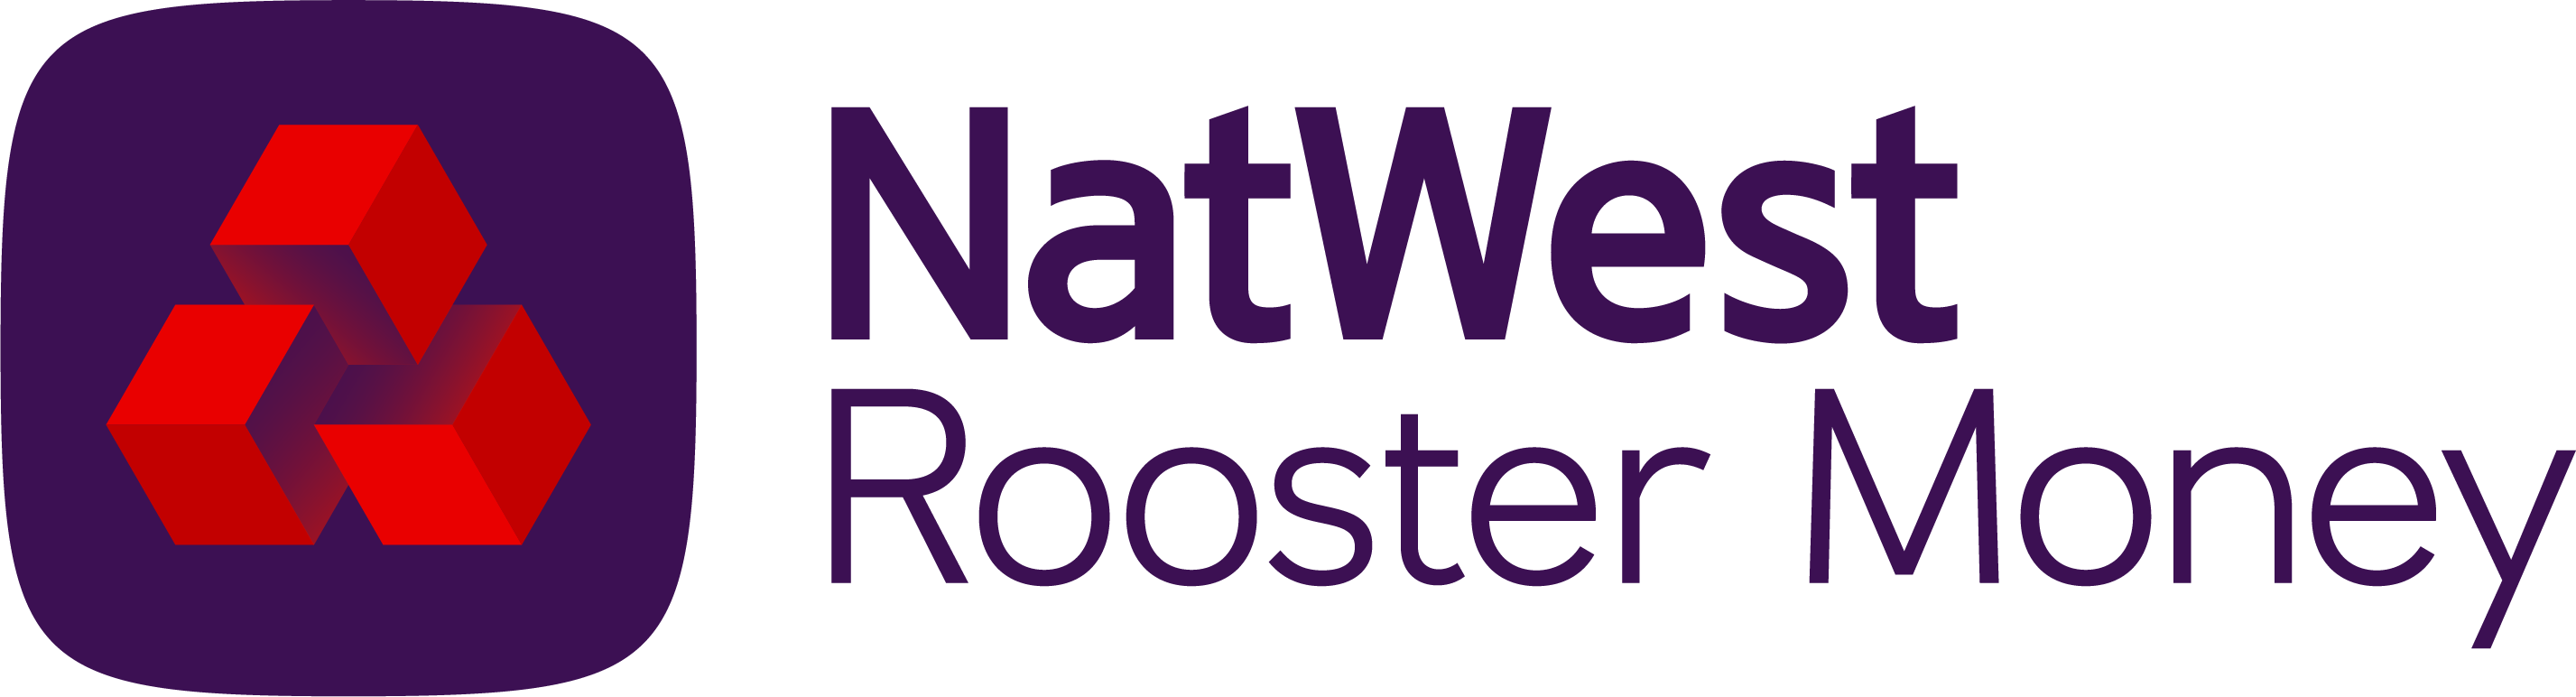 Natwest Rooster Money Review